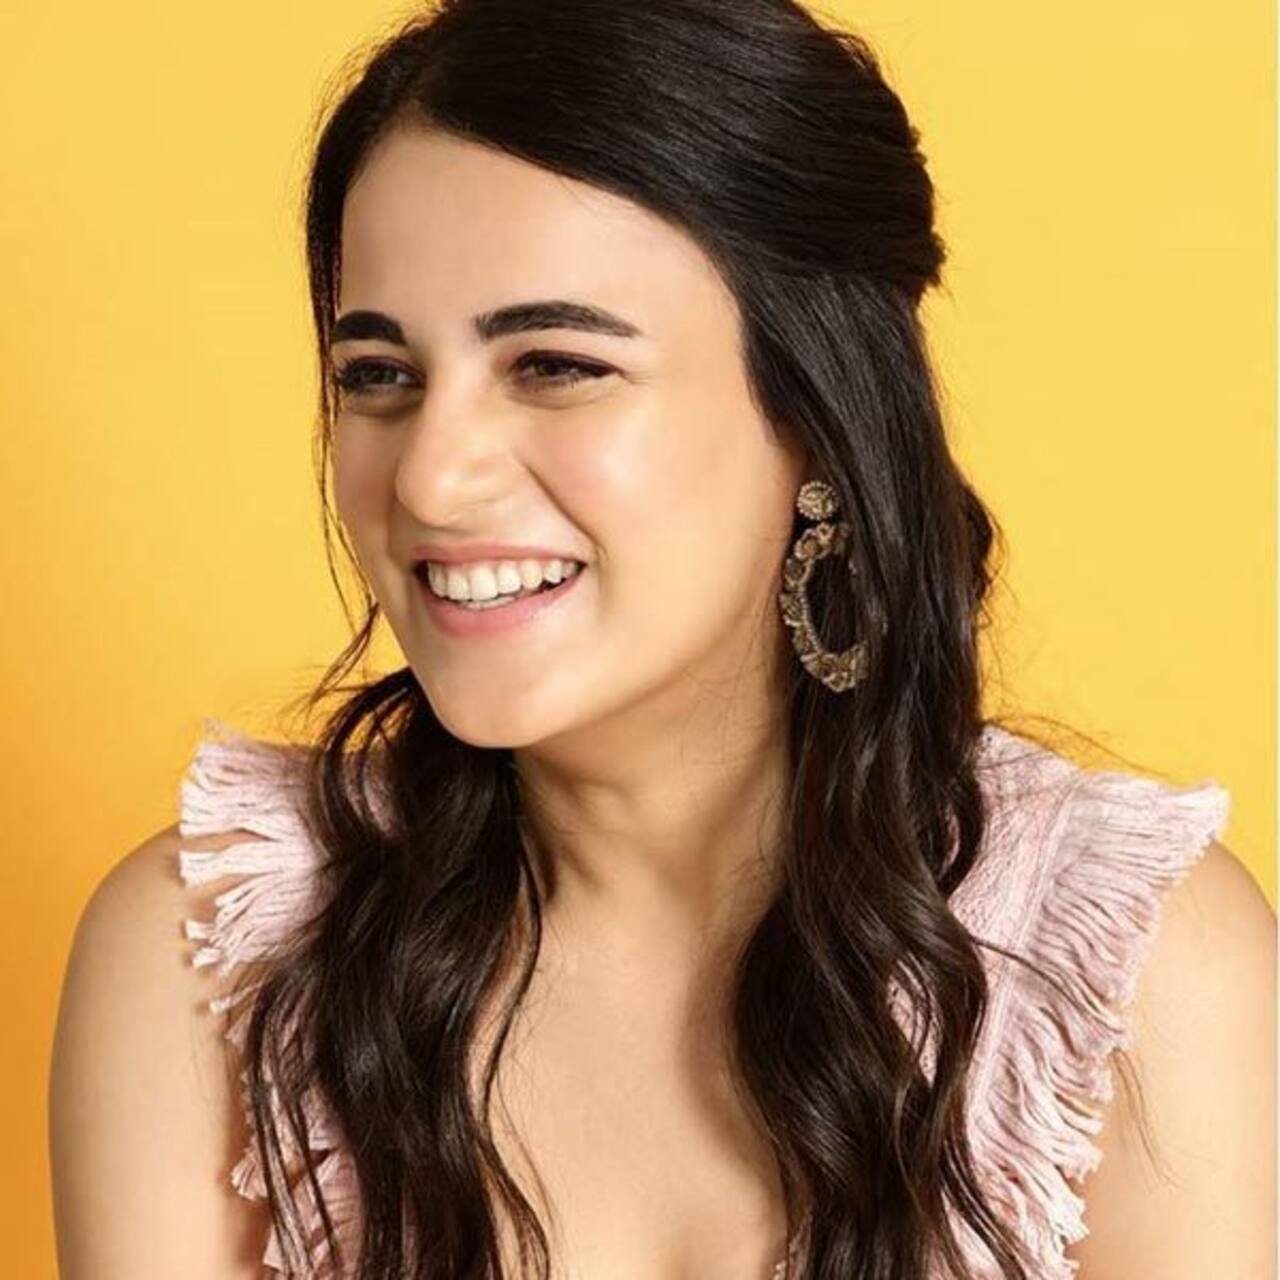 'Kuch nahi hoga,' Radhika Madan reveals how people reacted after she switched to films from TV